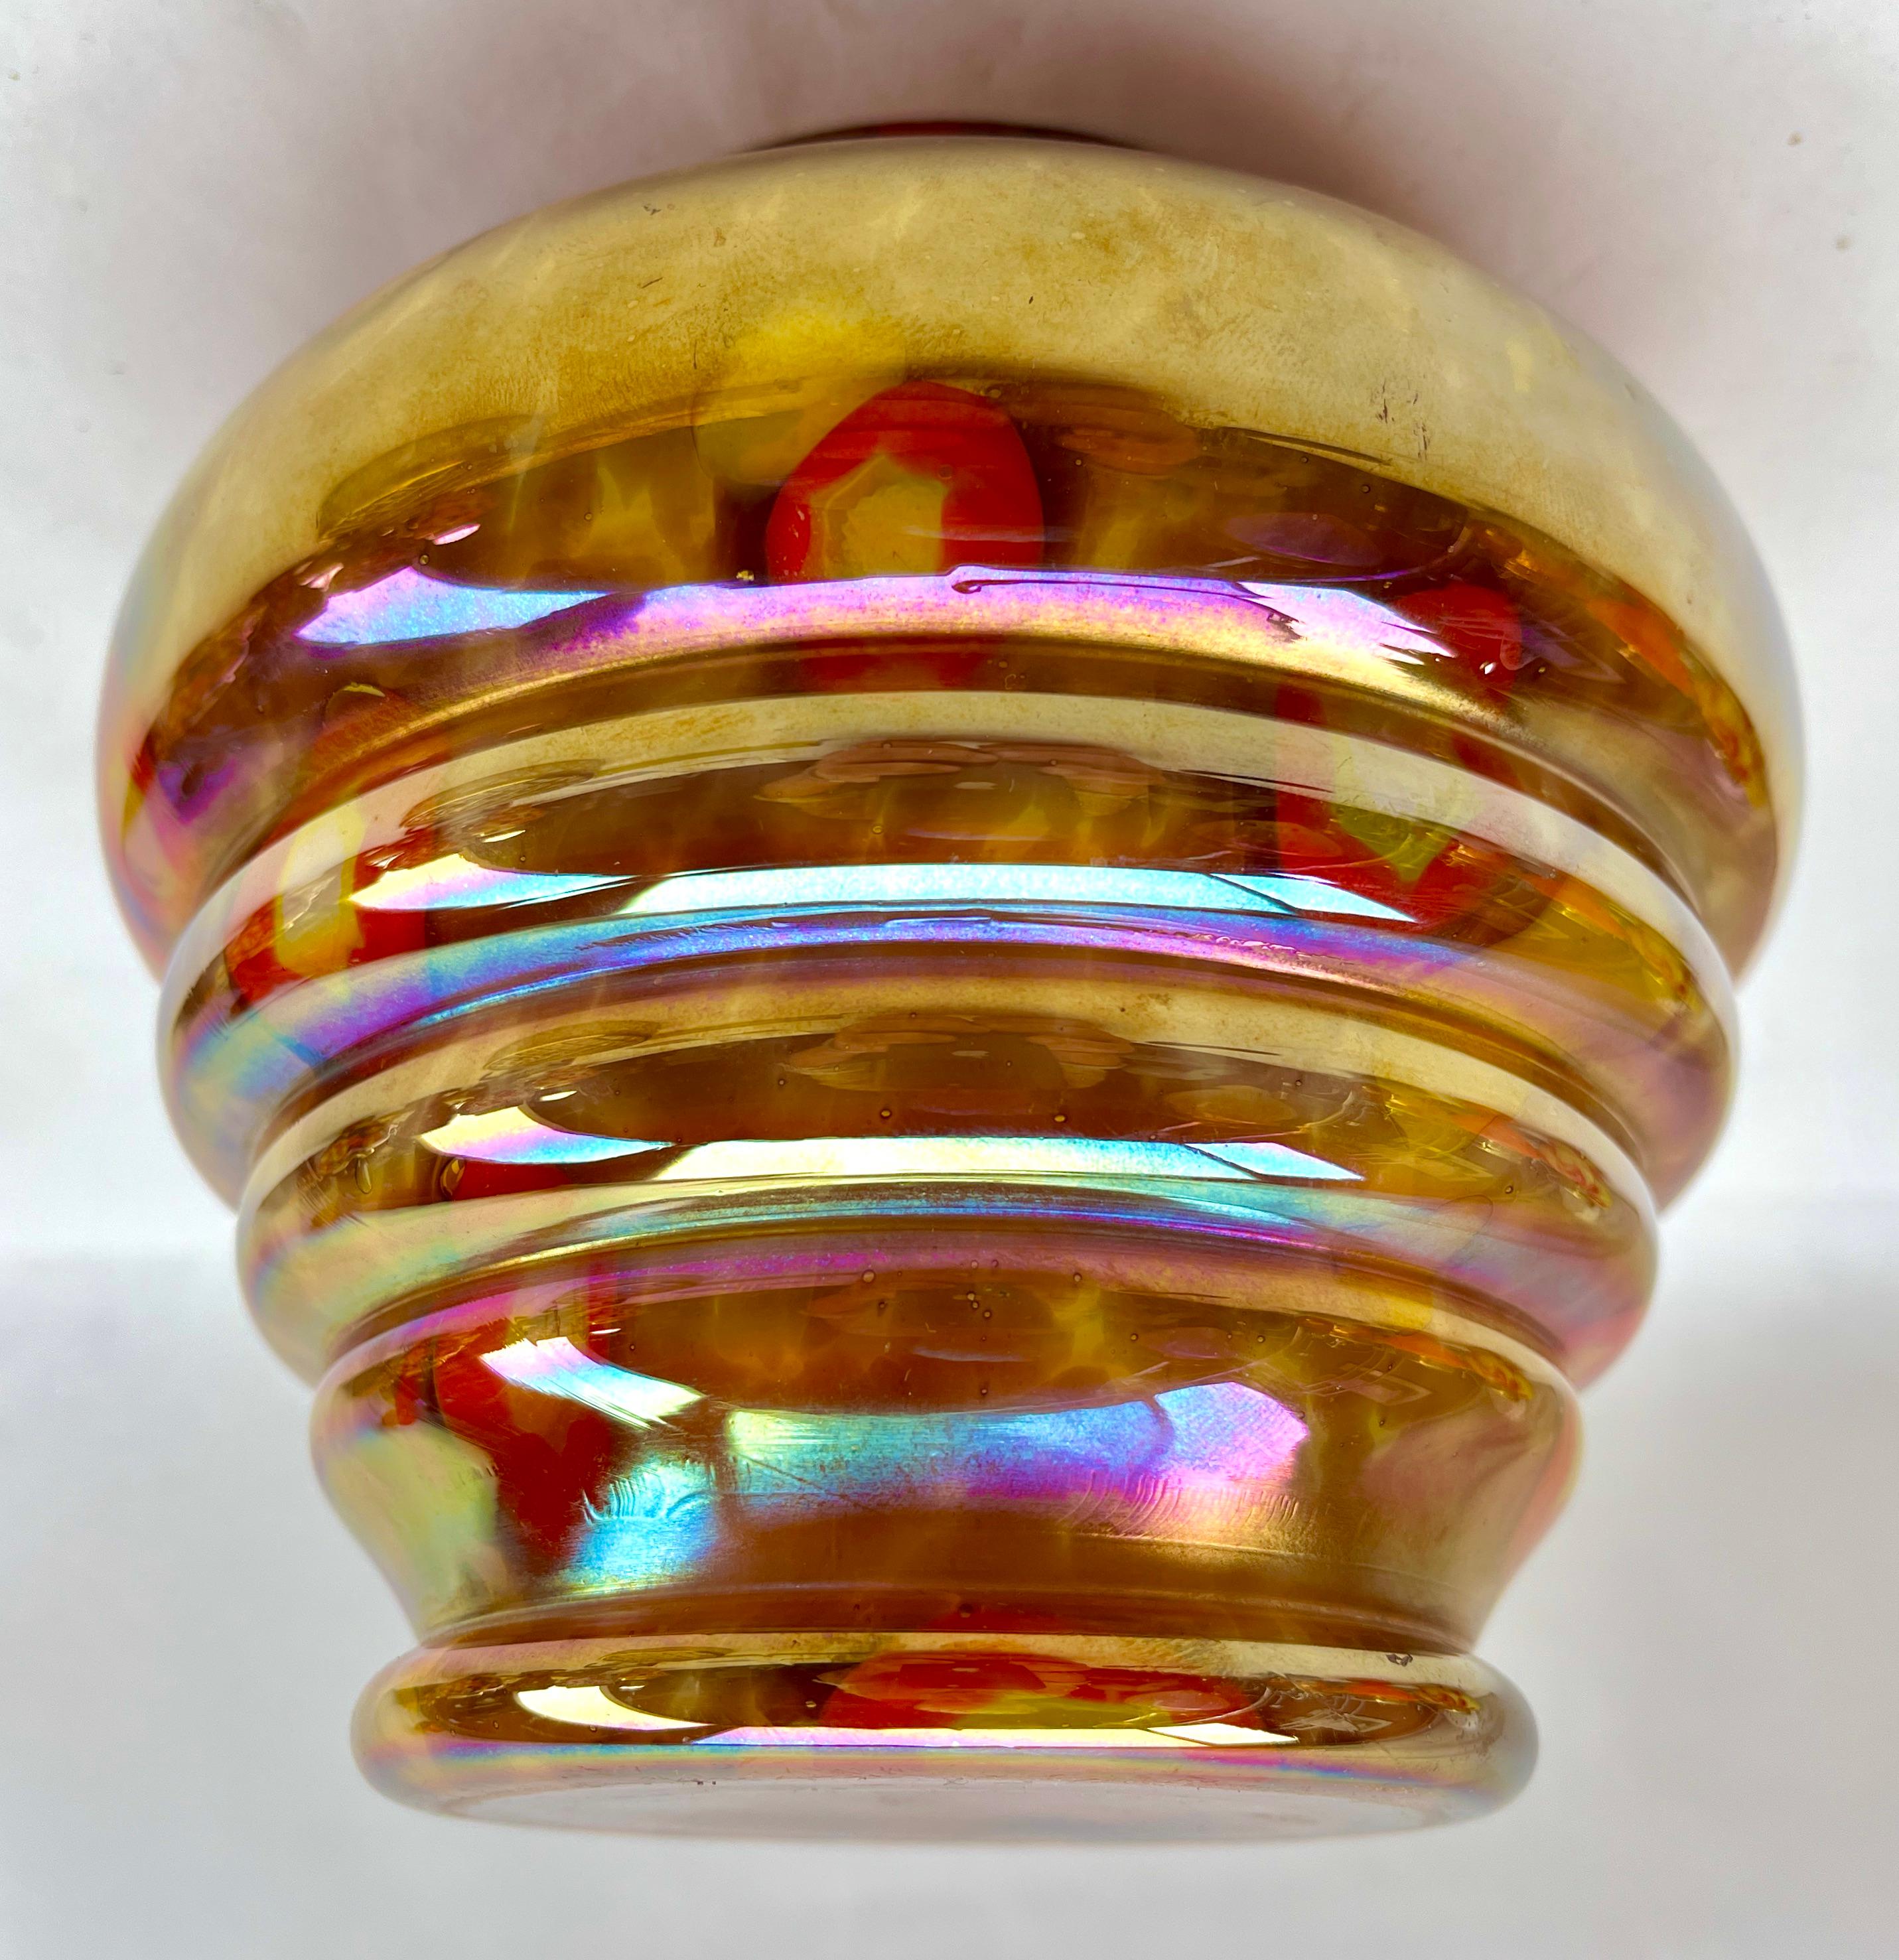 'Pique Fleurs' Iridescent Glass Vase, in Multi Color Decor with Grille, 1930s  For Sale 3